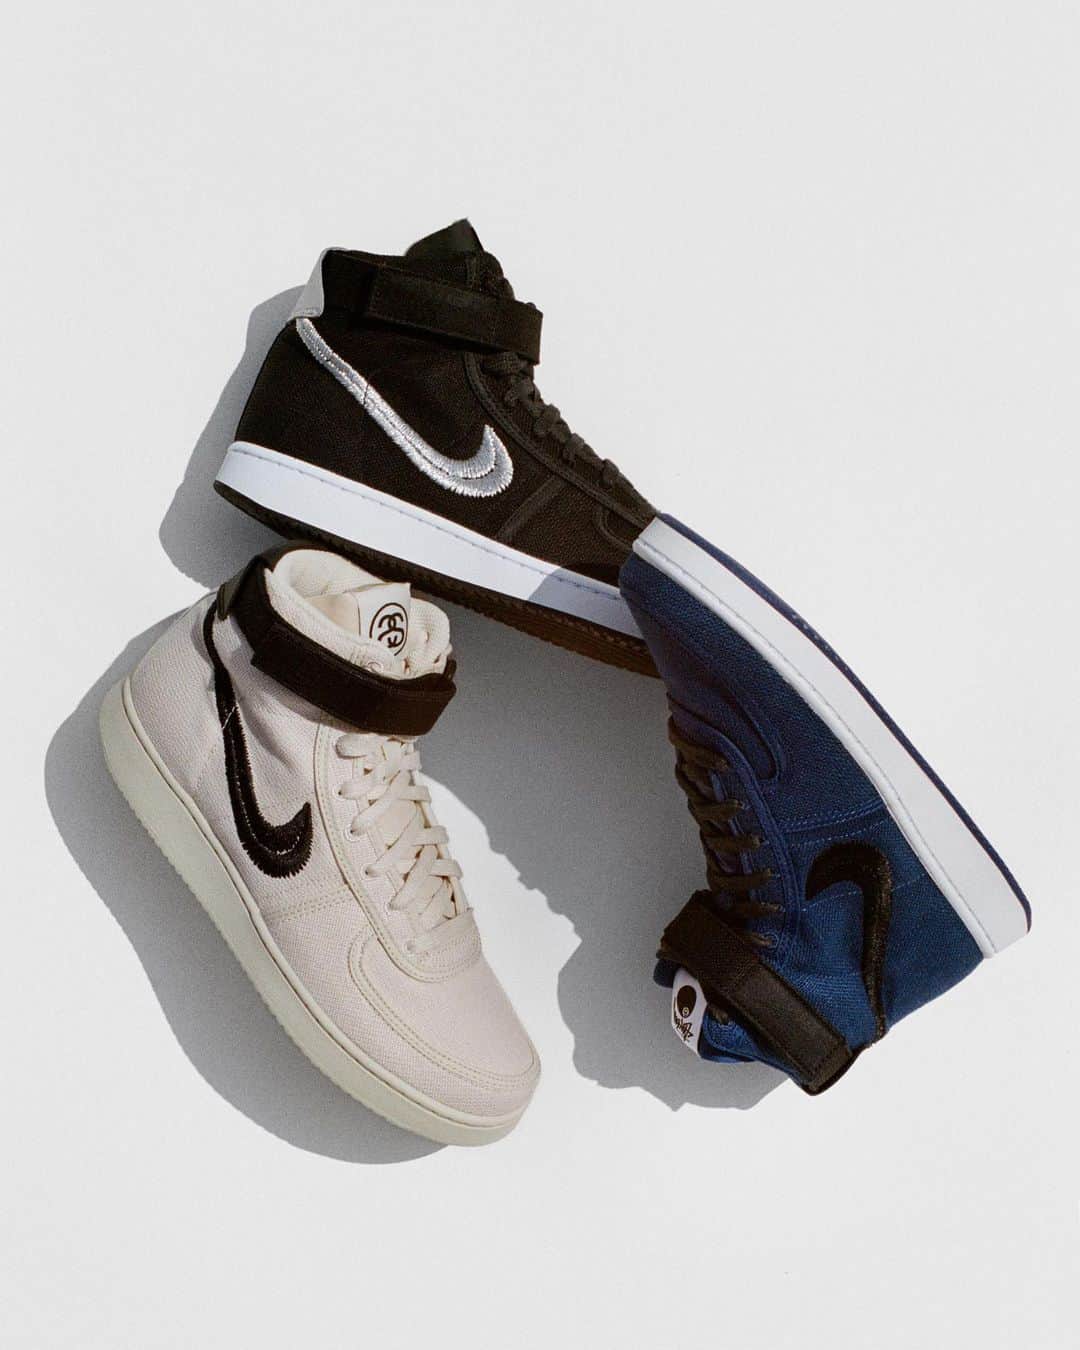 Stüssyのインスタグラム：「Stüssy & Nike Vandal High...  available worldwide at select chapter stores, select  Dover Street Market locations, and stussy. com on  Friday, June 9th  North America - Friday June 9th, 10am PST UK - Friday June 9th, 10am BST Europe - Friday June 9th, 10am CET Japan, Korea, & All Other Regions - Saturday June  10th,  10am JST」